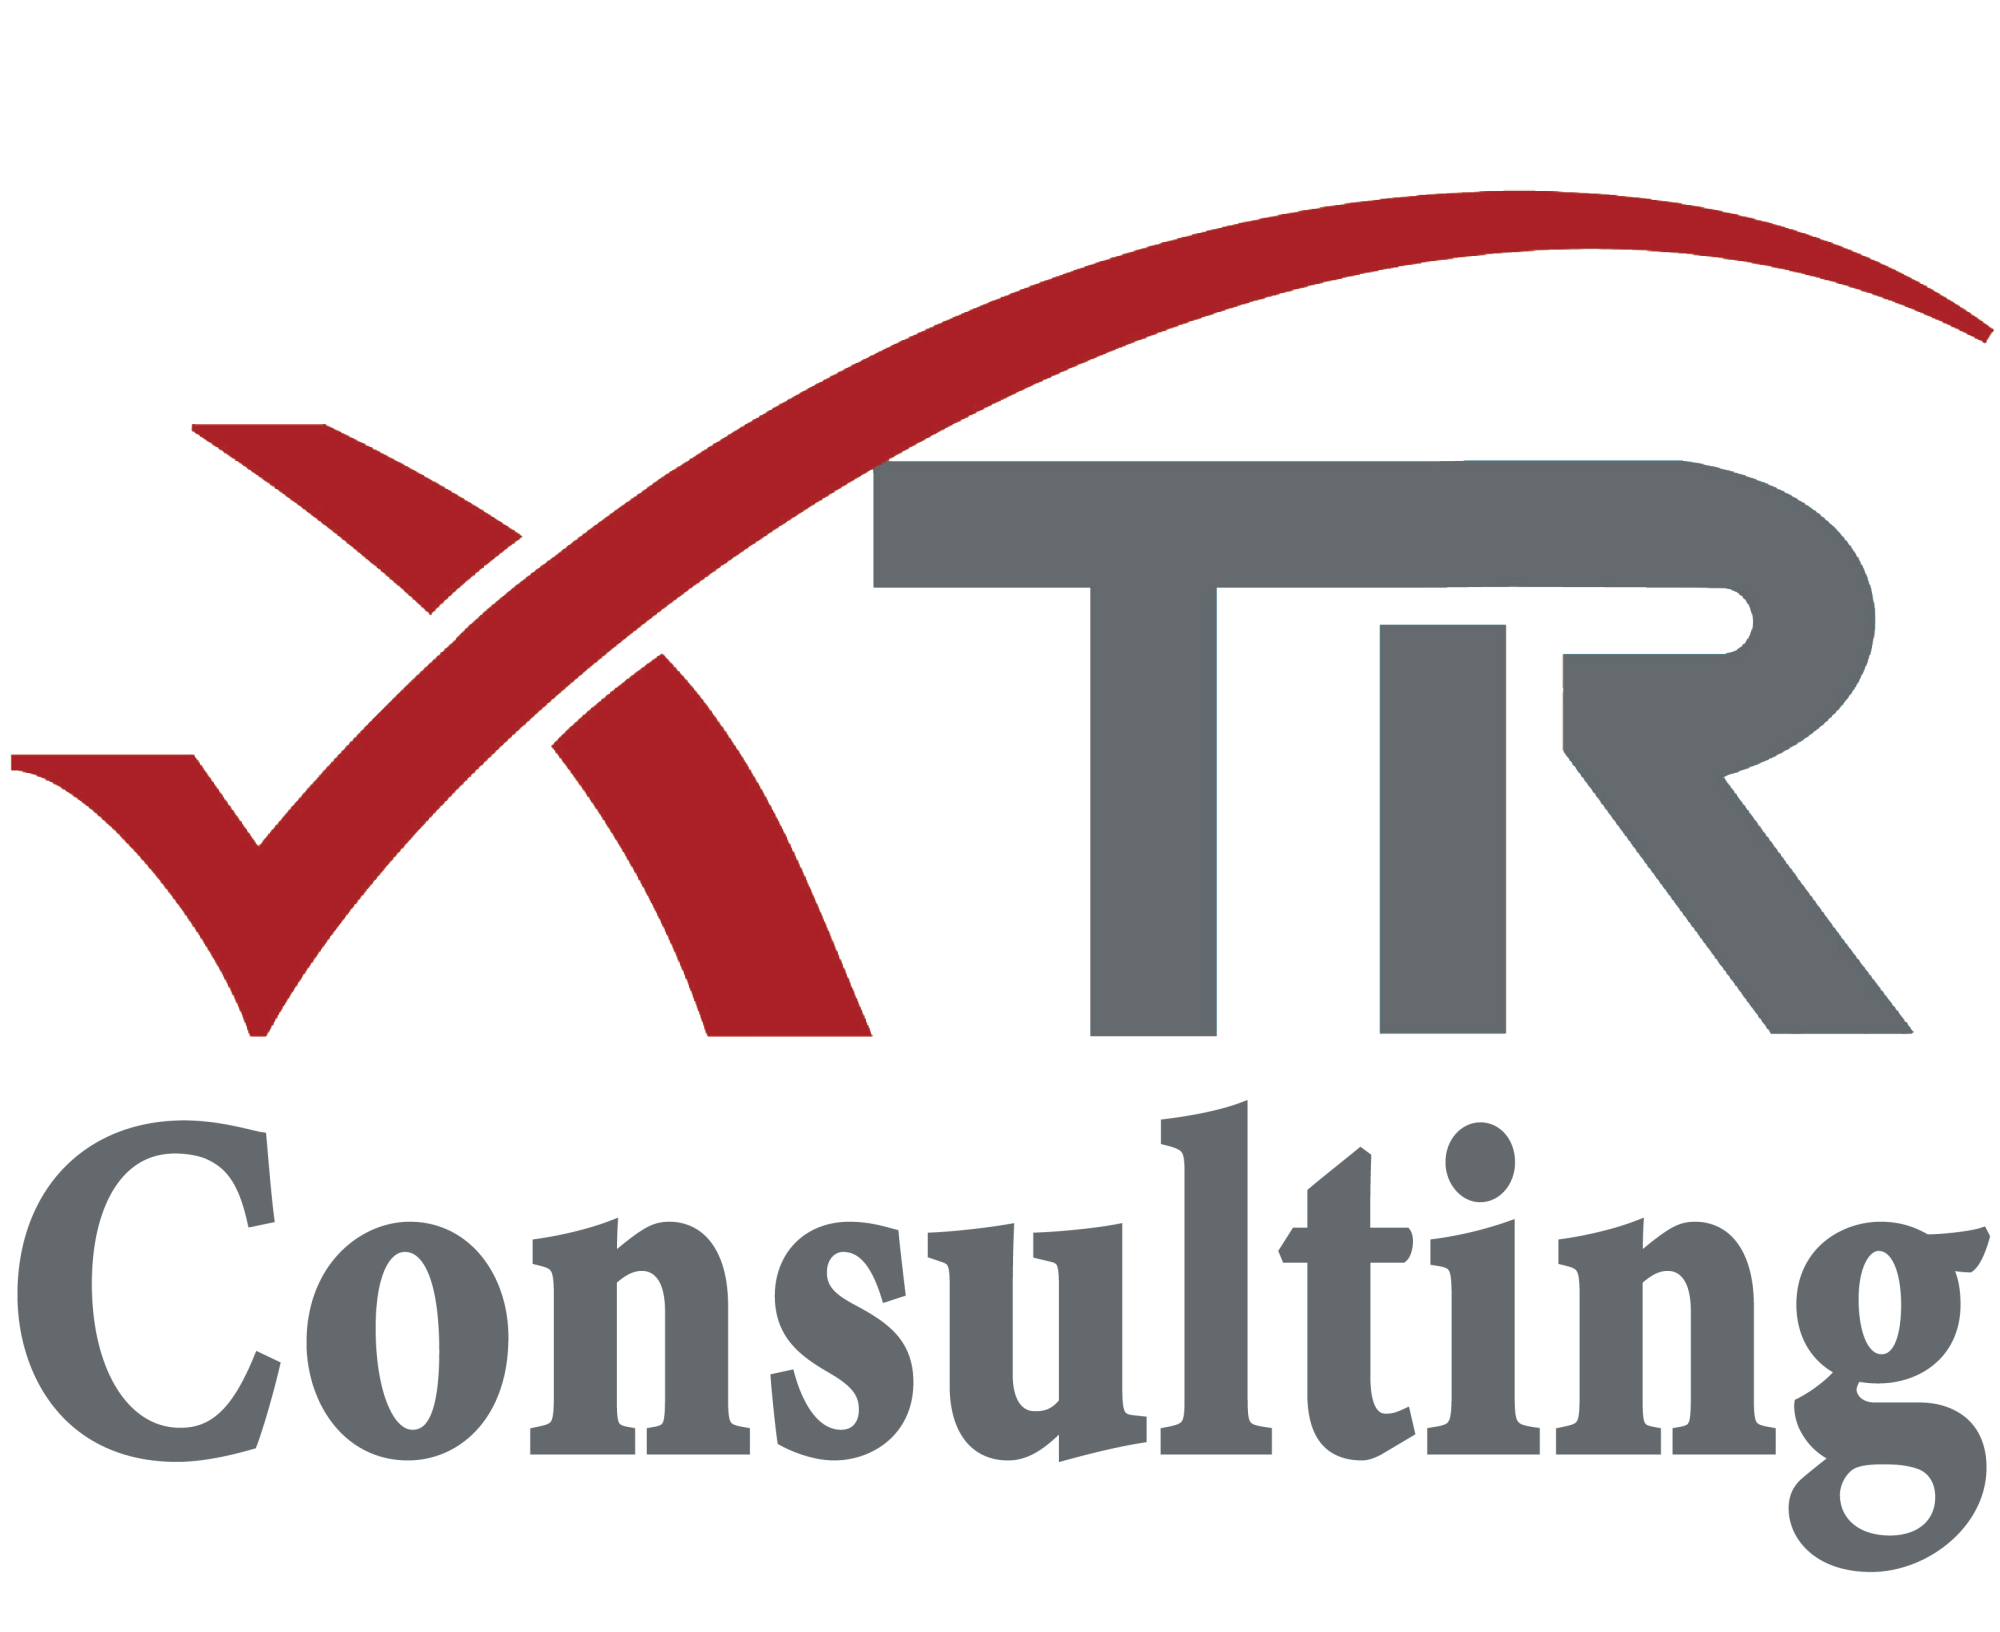 XTR Consulting